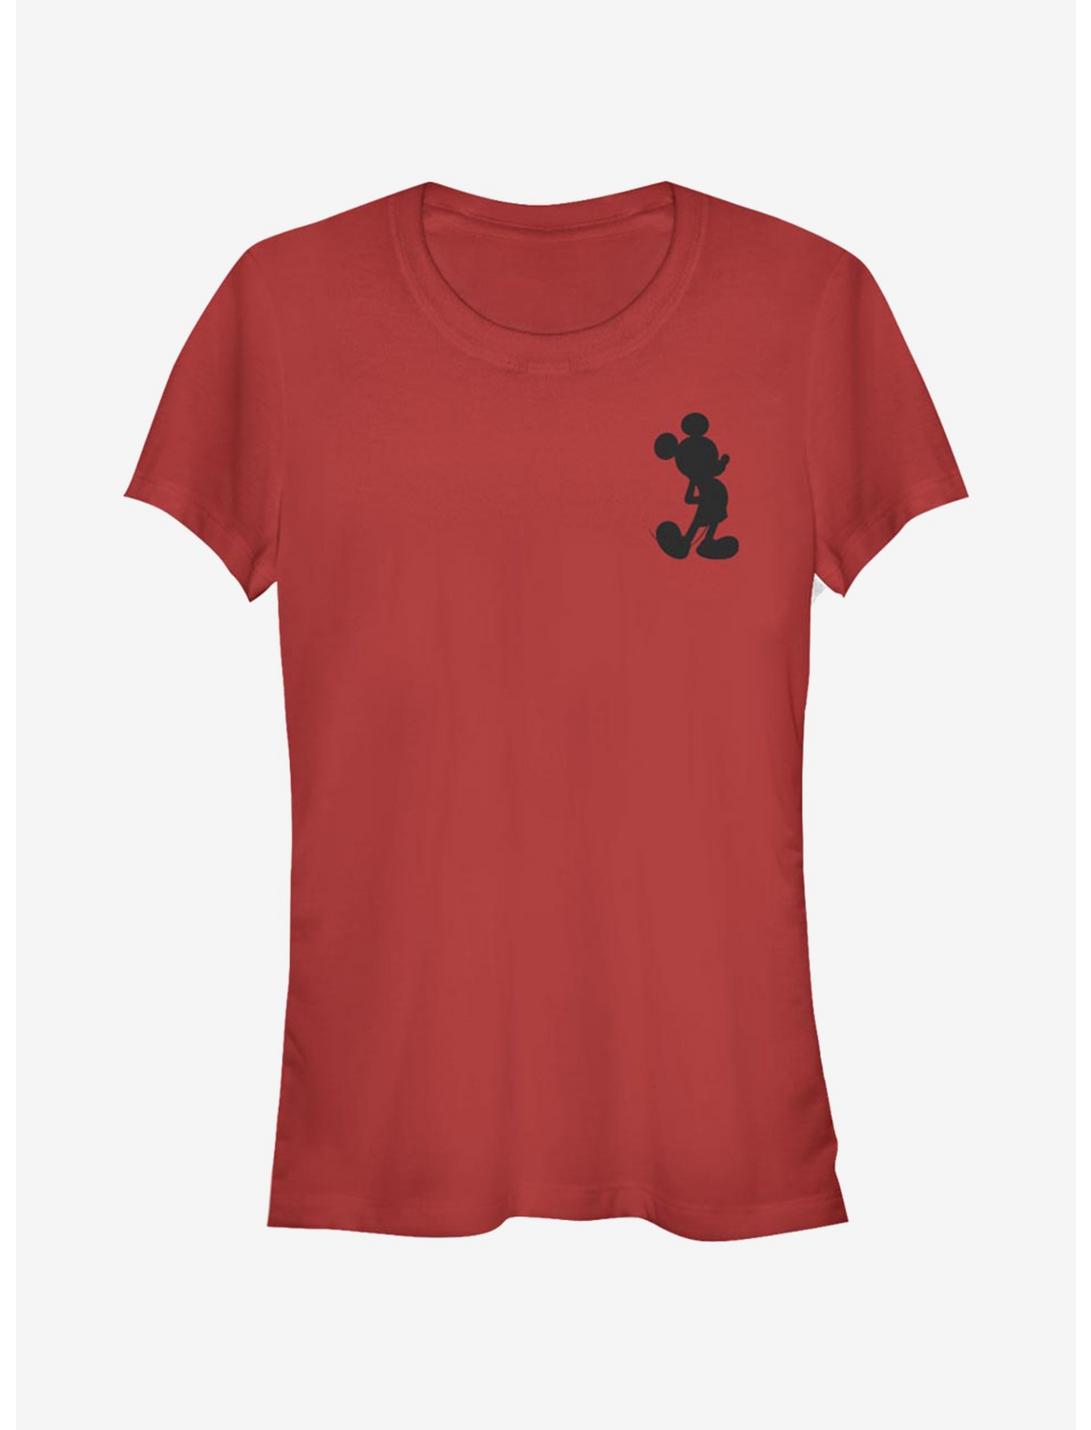 Disney Mickey Mouse Mickey Silhouette Girls T-Shirt, RED, hi-res